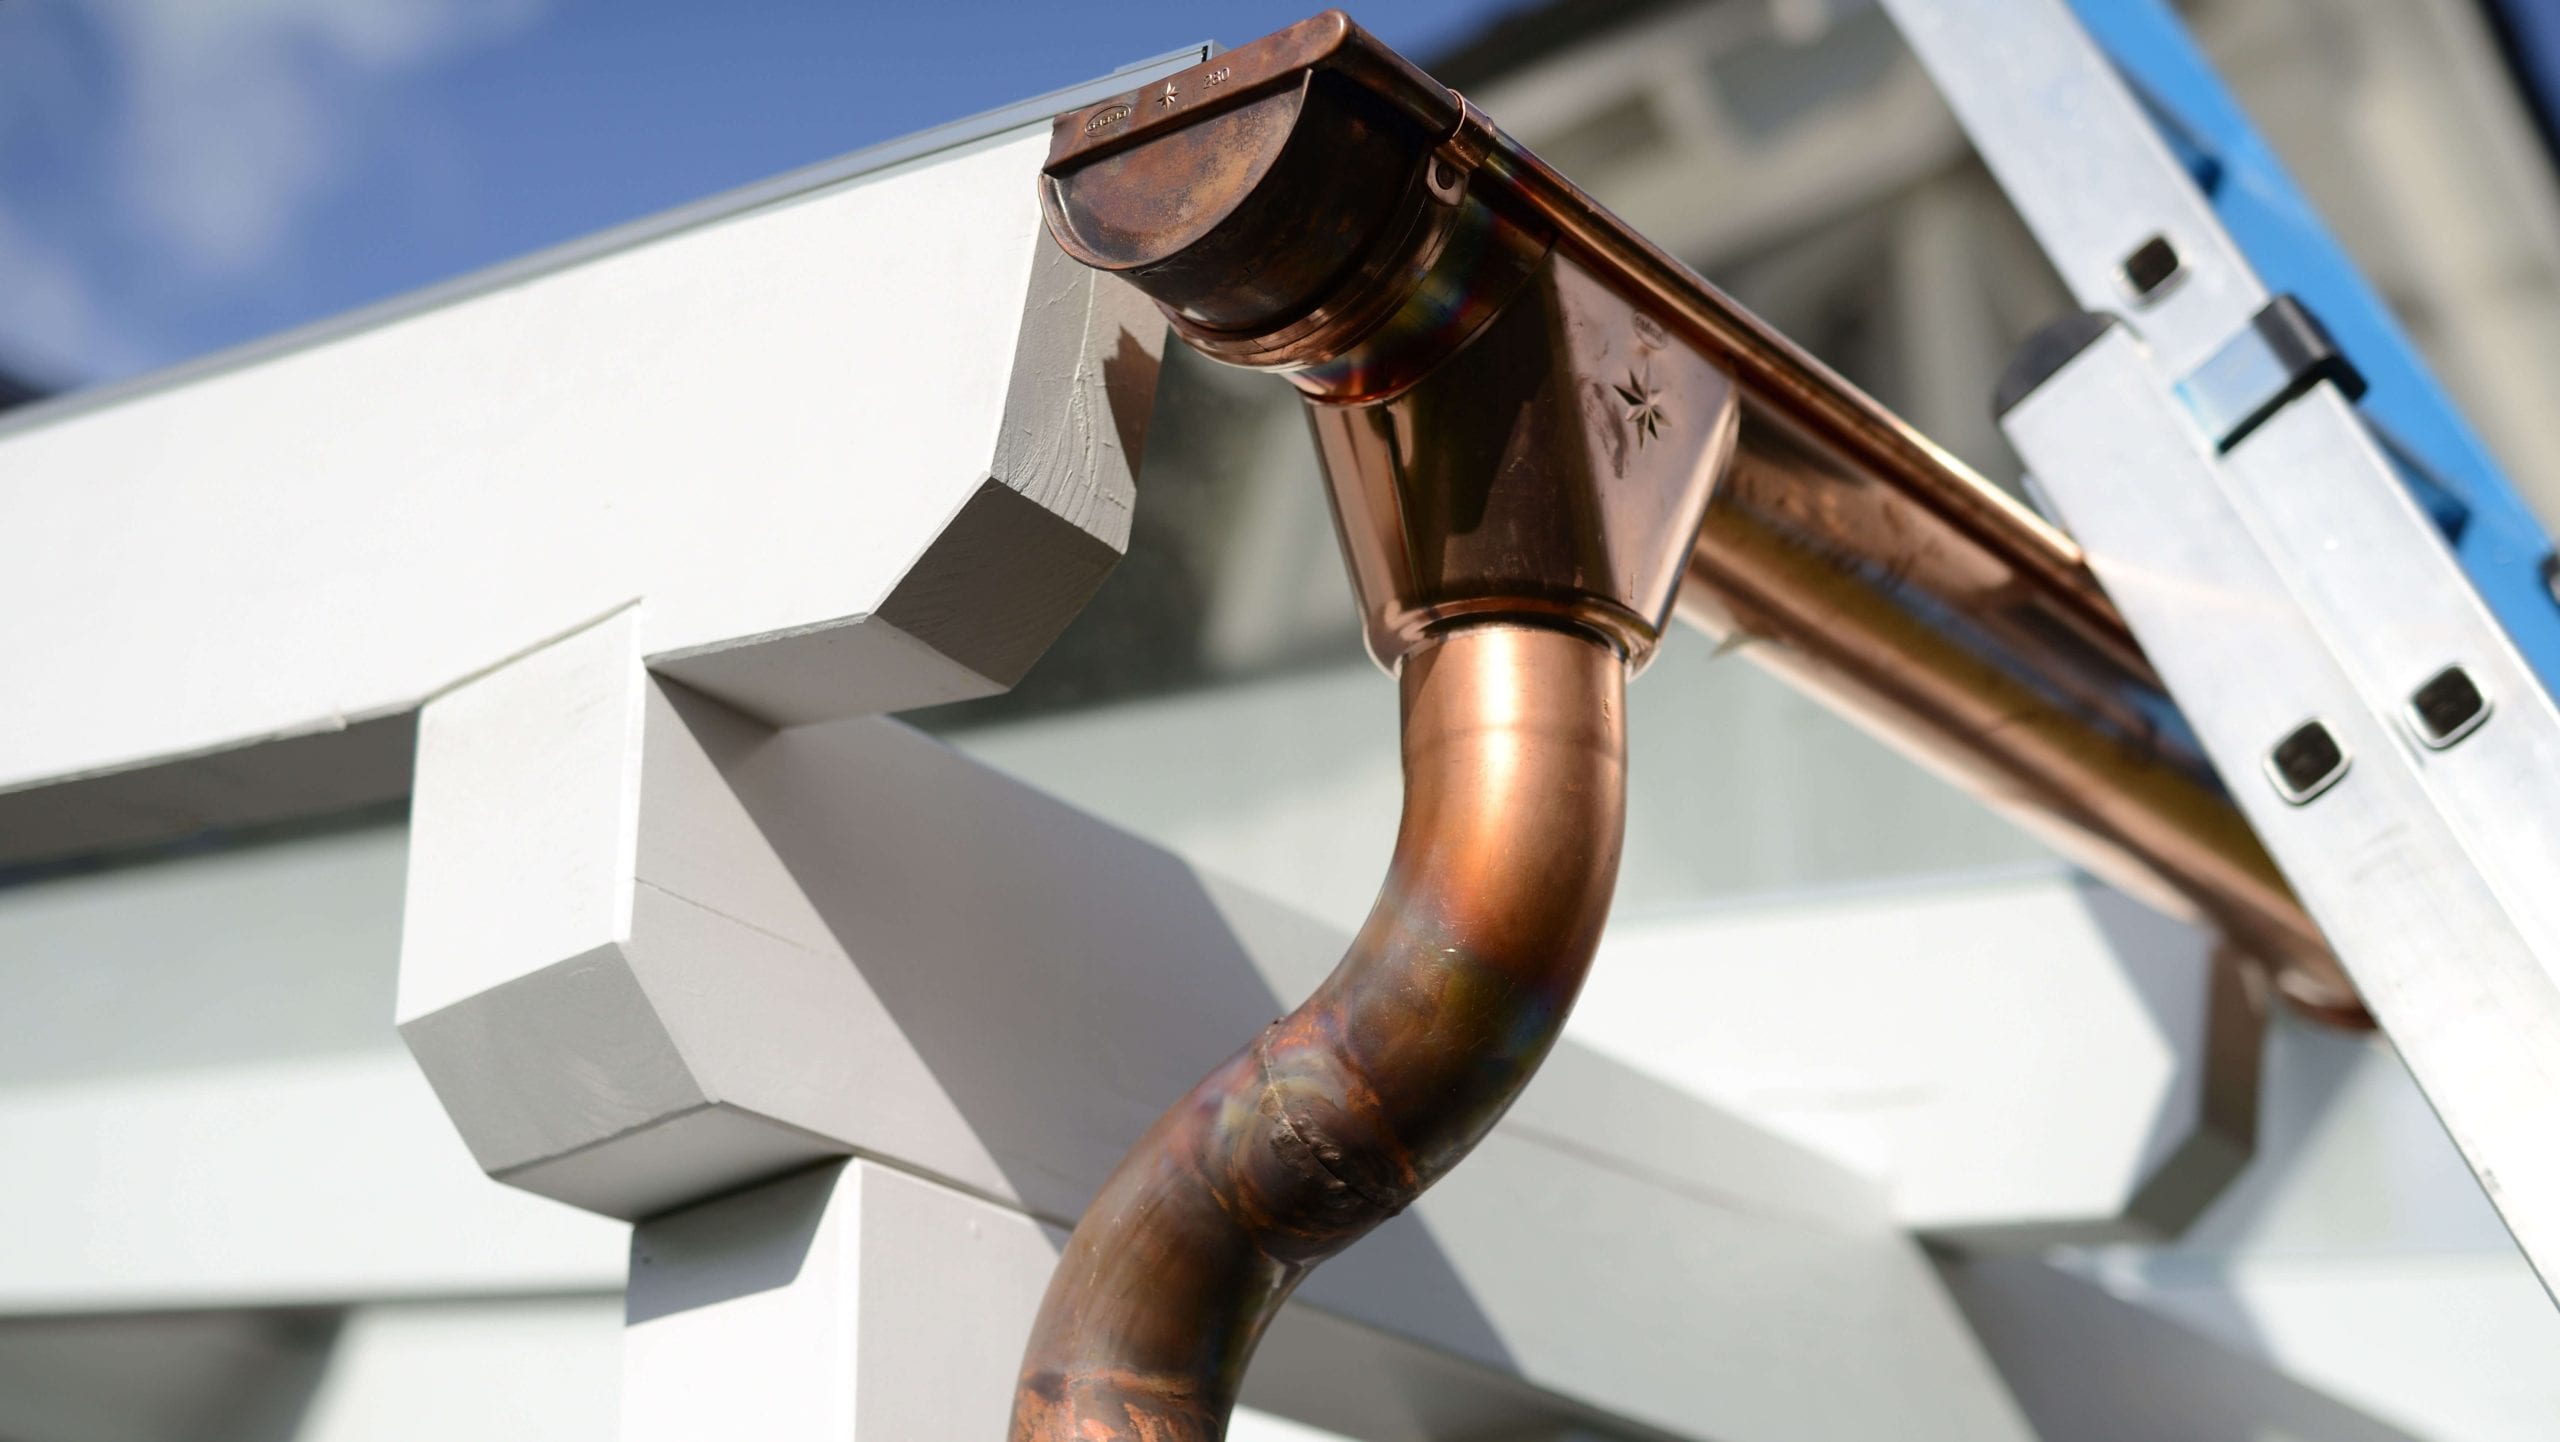 Make your property stand out with copper gutters. Contact for gutter installation in Phoenix